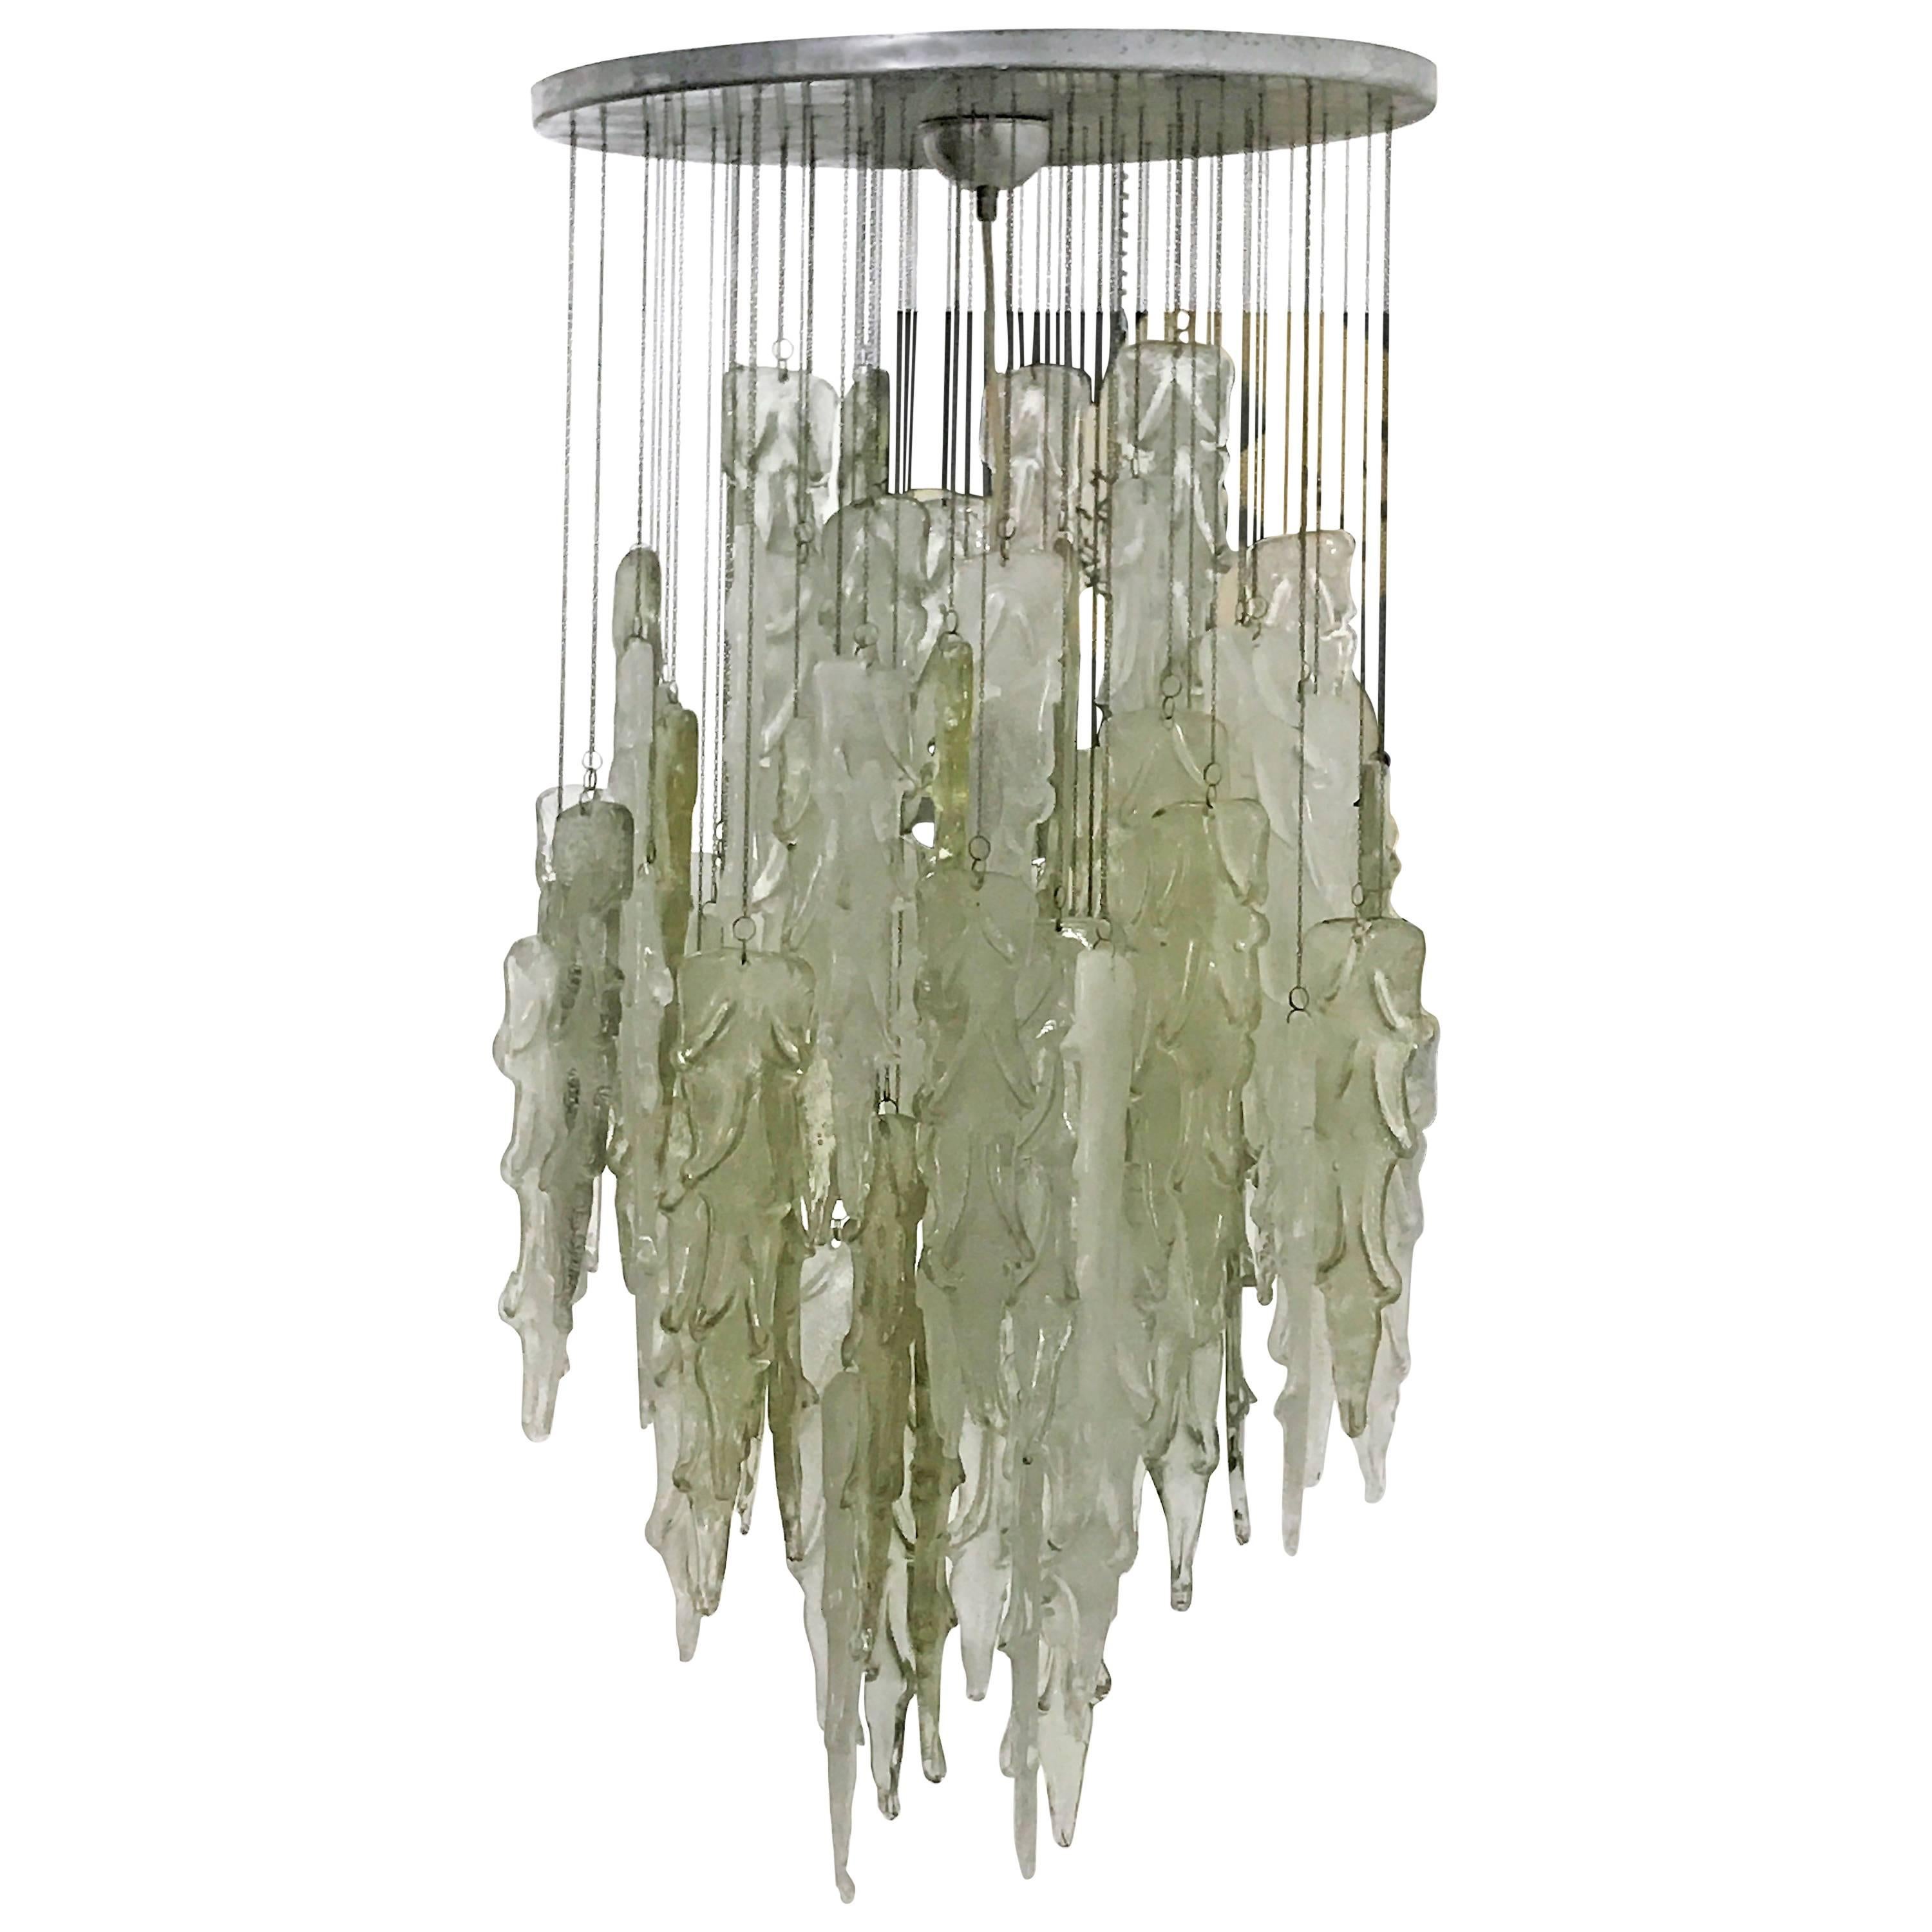 Rare Chandelier Attributed to Mazzega Murano Glass, 20th Century For Sale